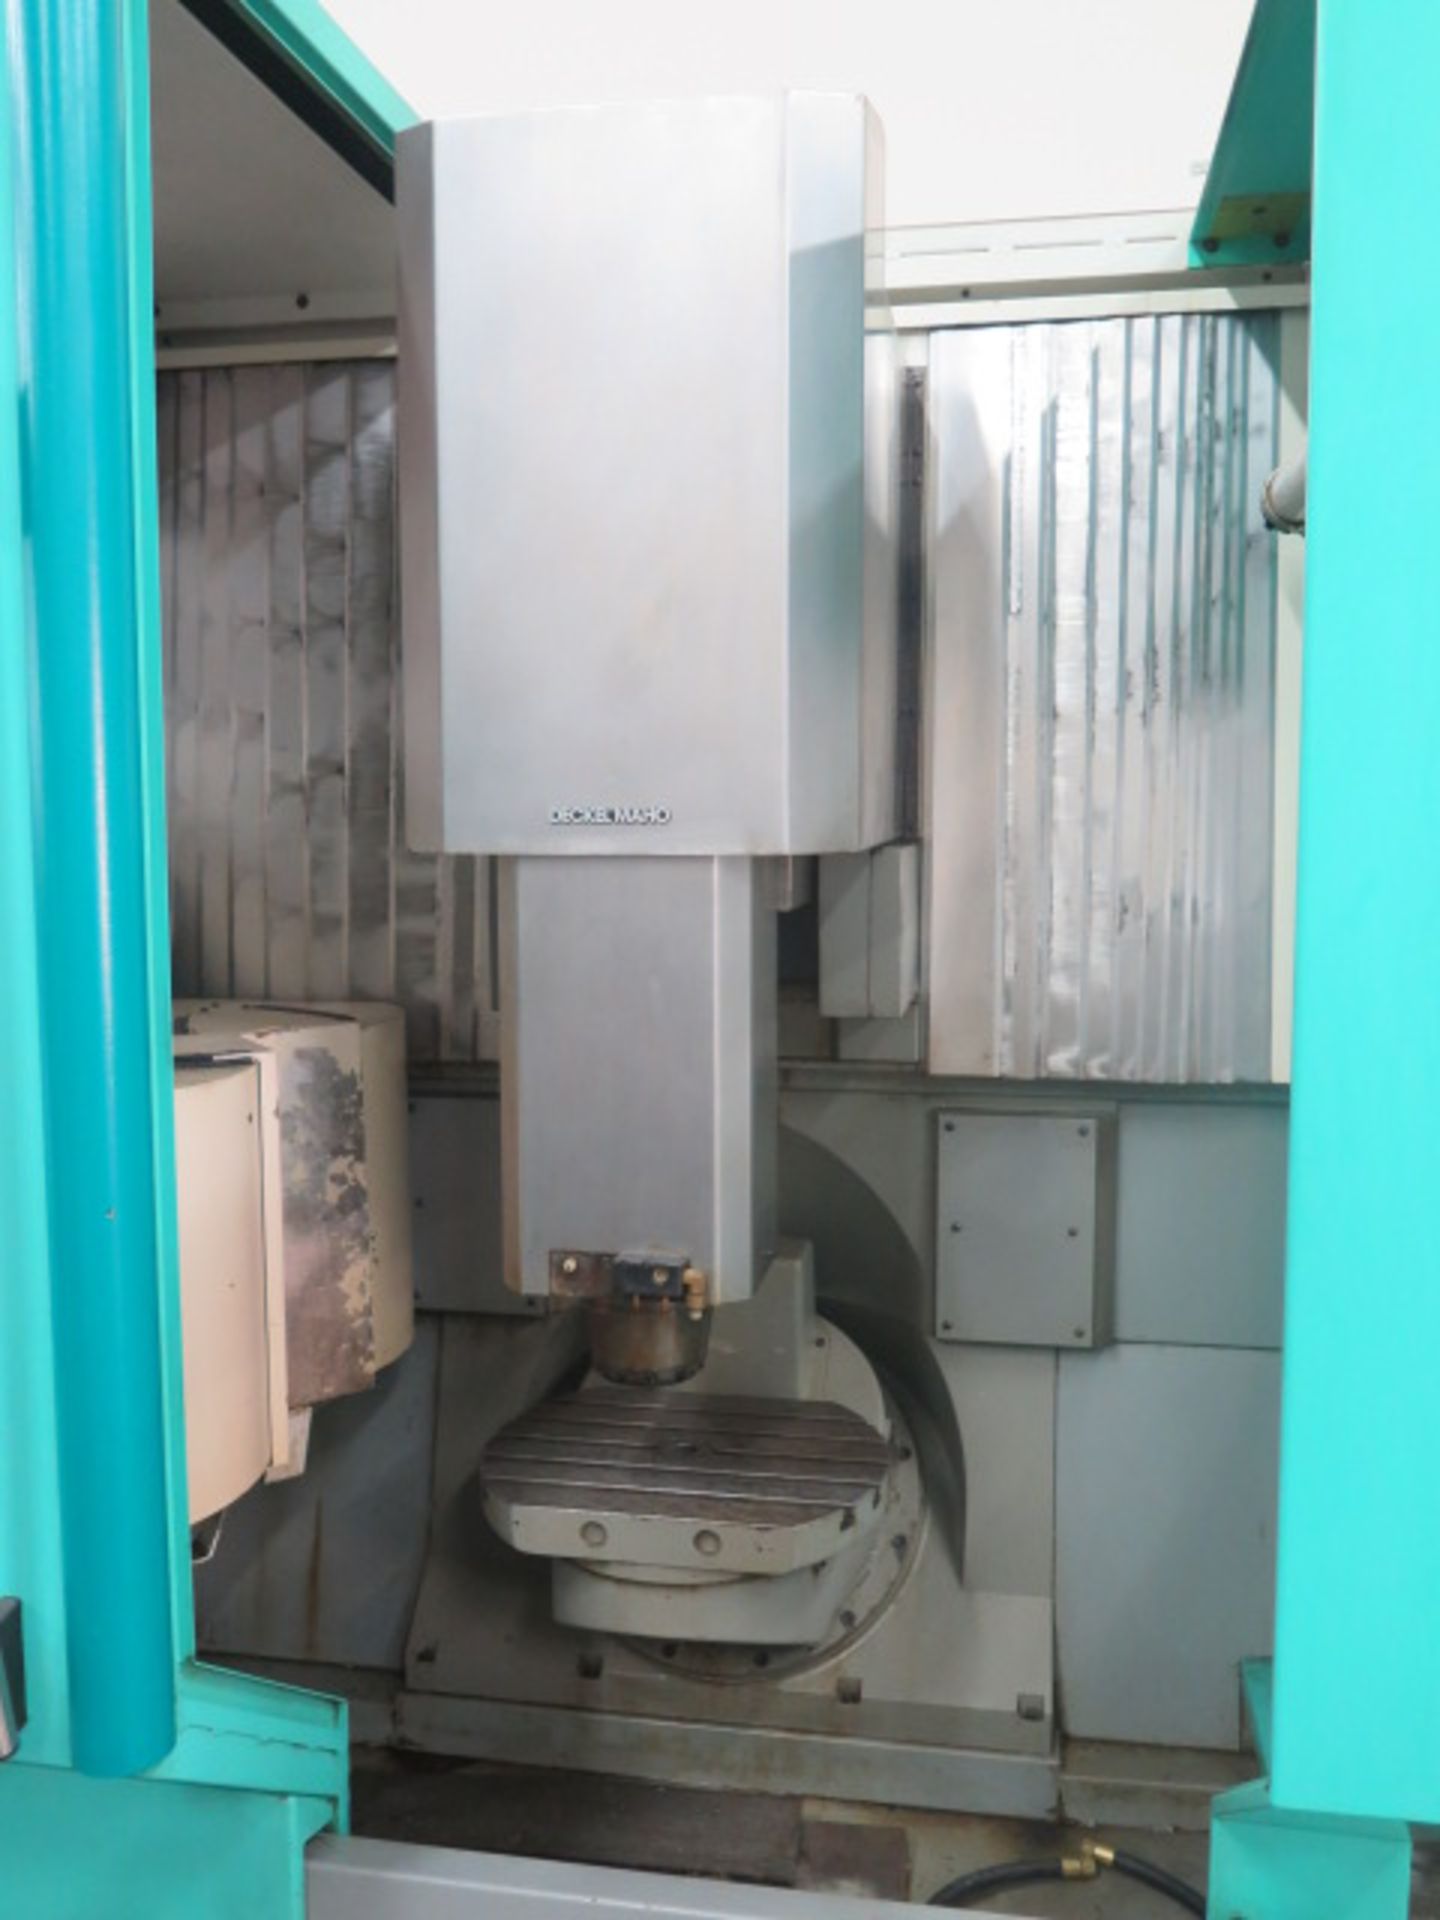 Deckel MAHO DMU50V 4-Axis CNC Vertical Machining Center (NEEDS WORK) s/n 054820 w/ Deckel Mill - Image 4 of 13